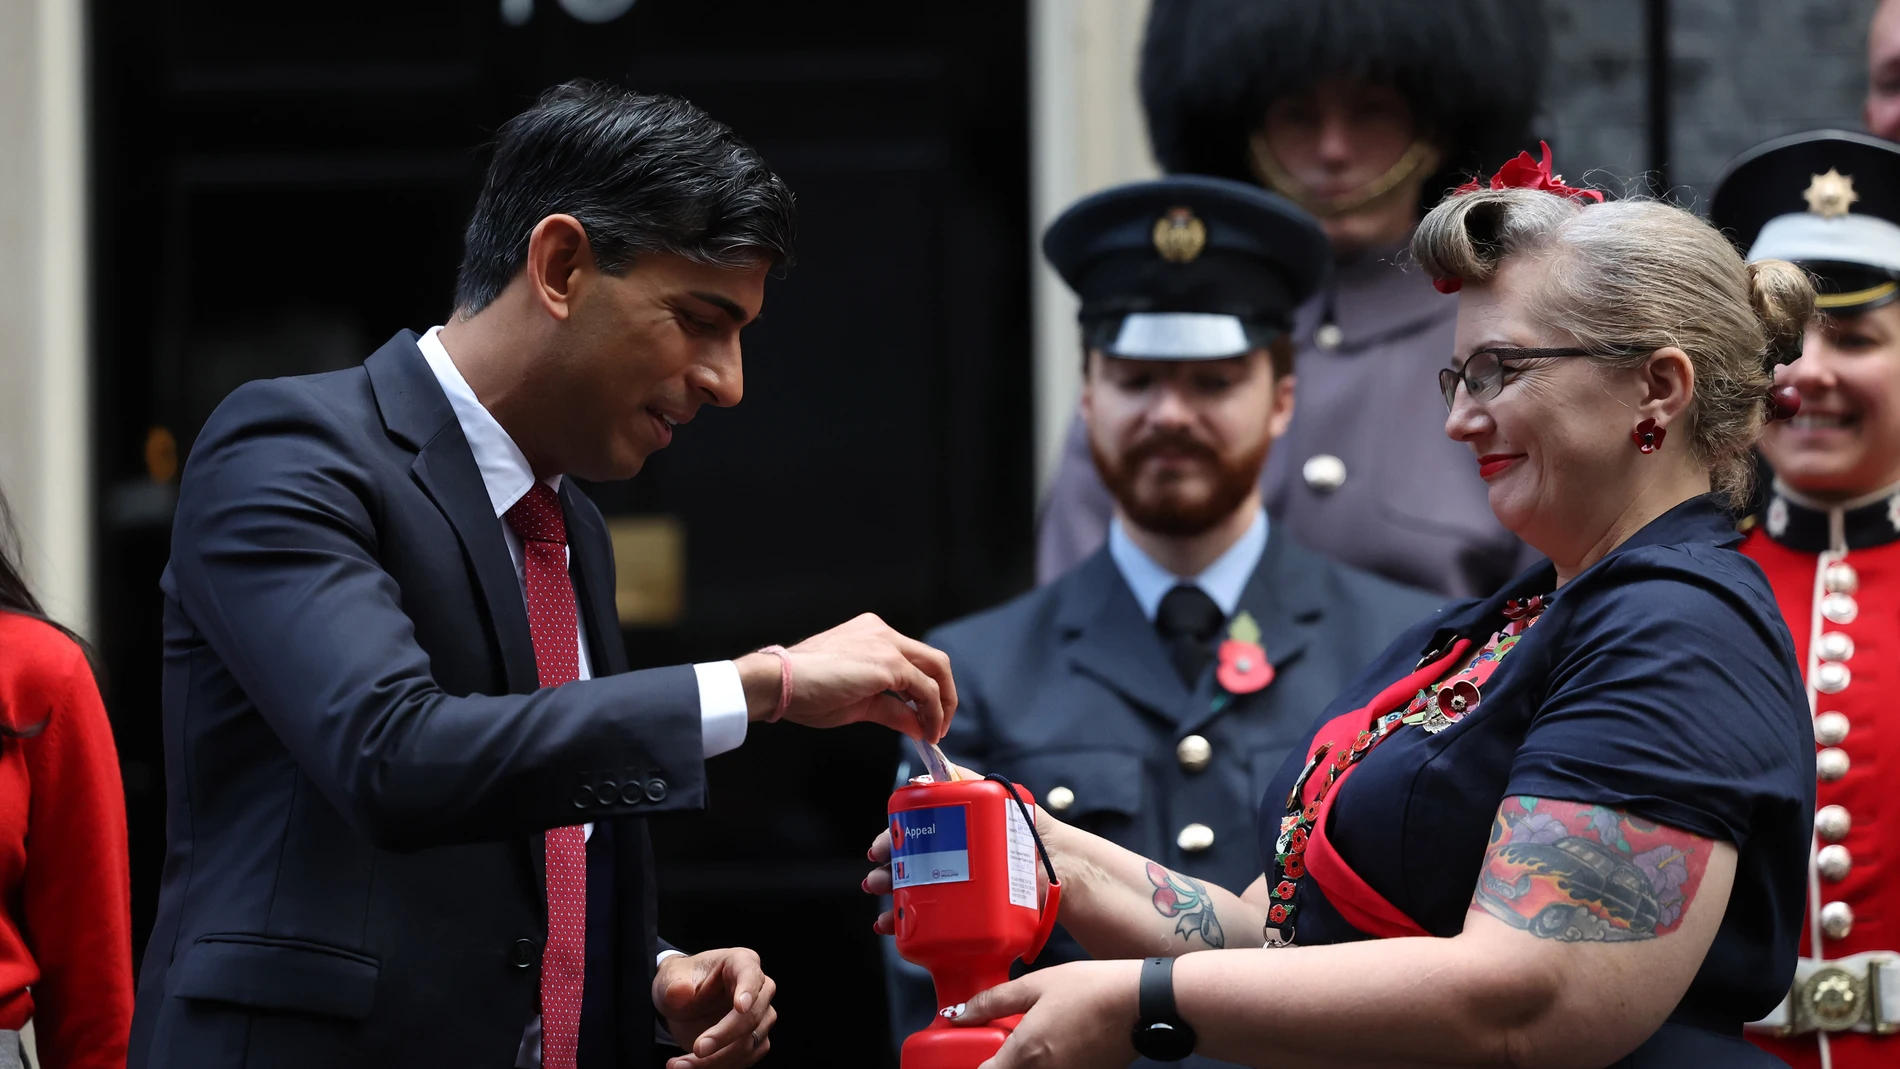 London (United Kingdom), 30/10/2023.- Britain'Äôs Prime Minister Rishi Sunak buys a poppy from the Royal Legion during a photo-call outside Downing Street in London, Britain, 30 October 2023. Poppies from the Royal British Legion are worn as a symbol of support for the Armed Forces community. They are symbolically derived from the poppies that grew in the battlefields after World War One. (Reino Unido, Londres) EFE/EPA/NEIL HALL 